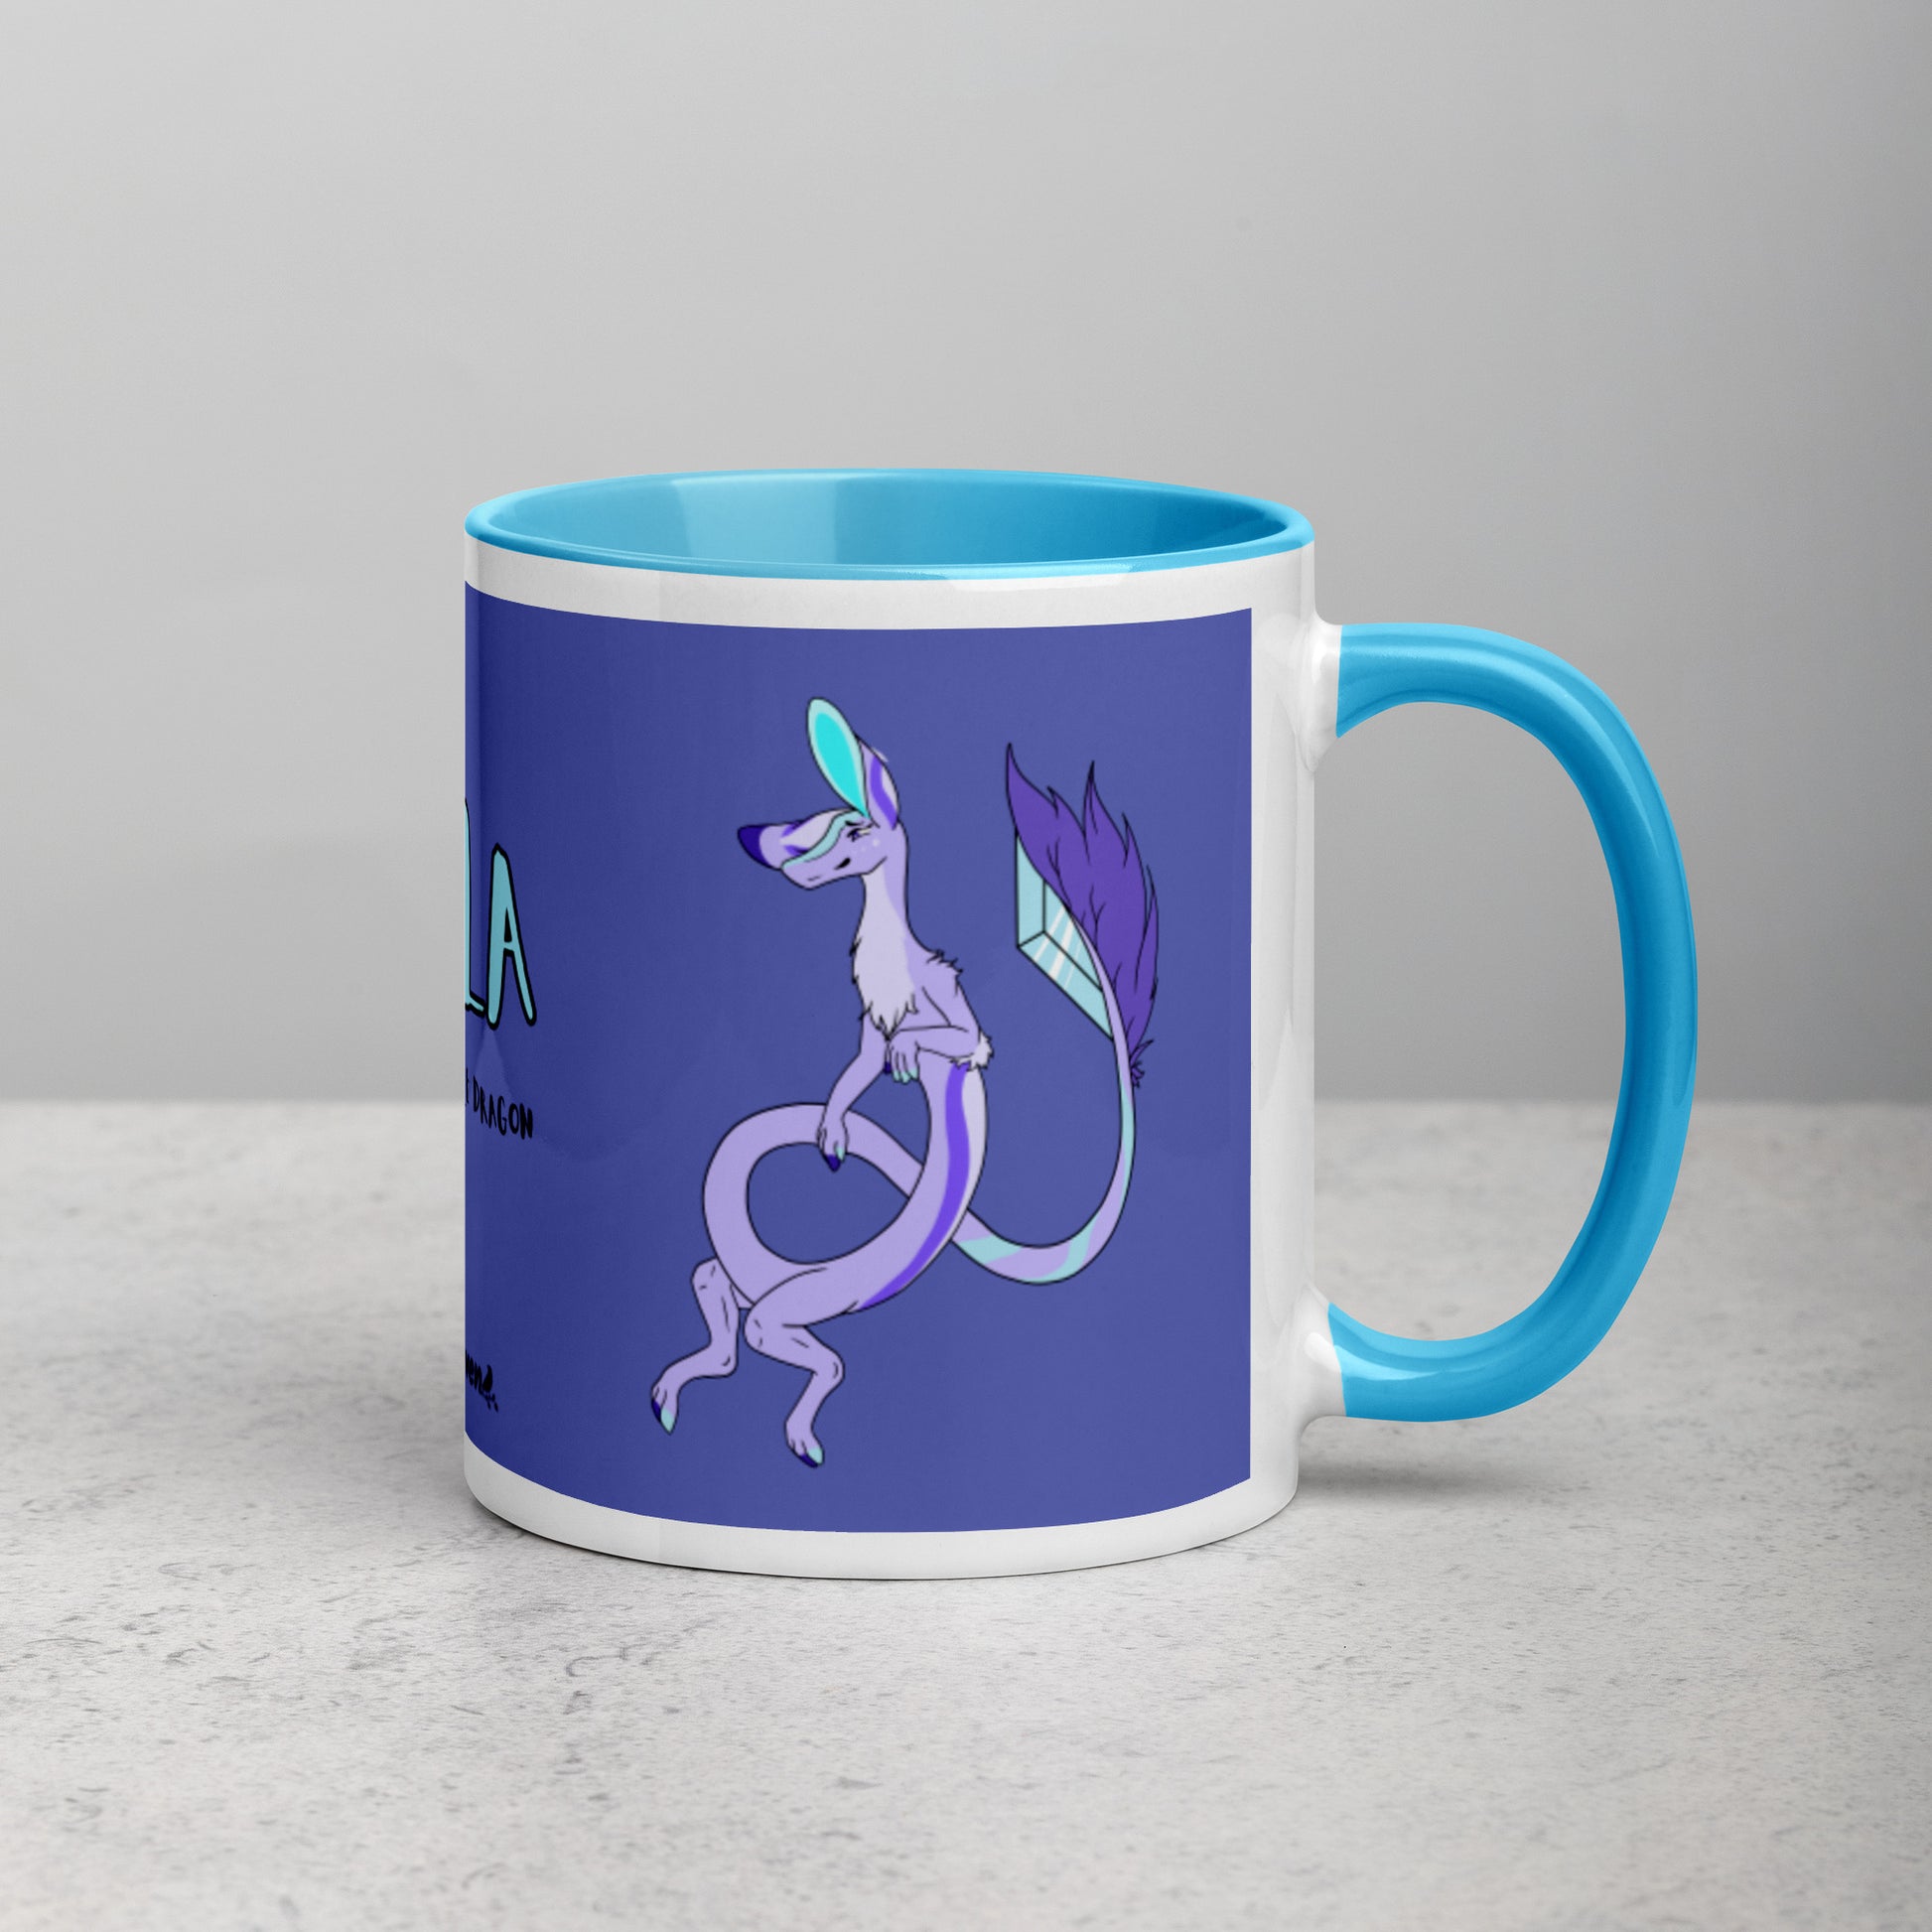 11 ounce white ceramic mug. Blue inside and handle. Features double-sided image of Layla the Lavender Fuzzy Noodle Dragon. Shown on tabletop with handle facing right.